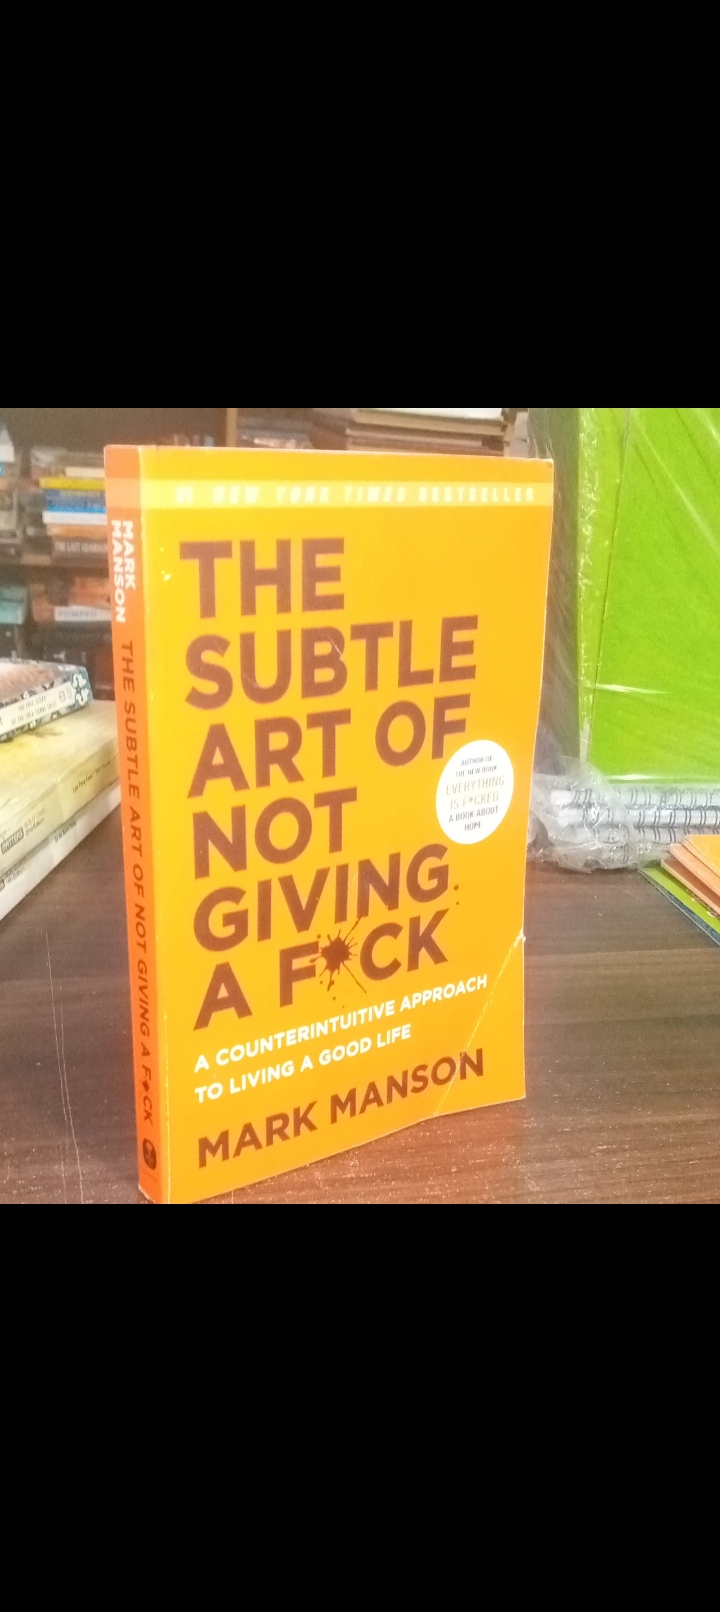 the subtle art of not giving a f*ck by mark menson. original paperback